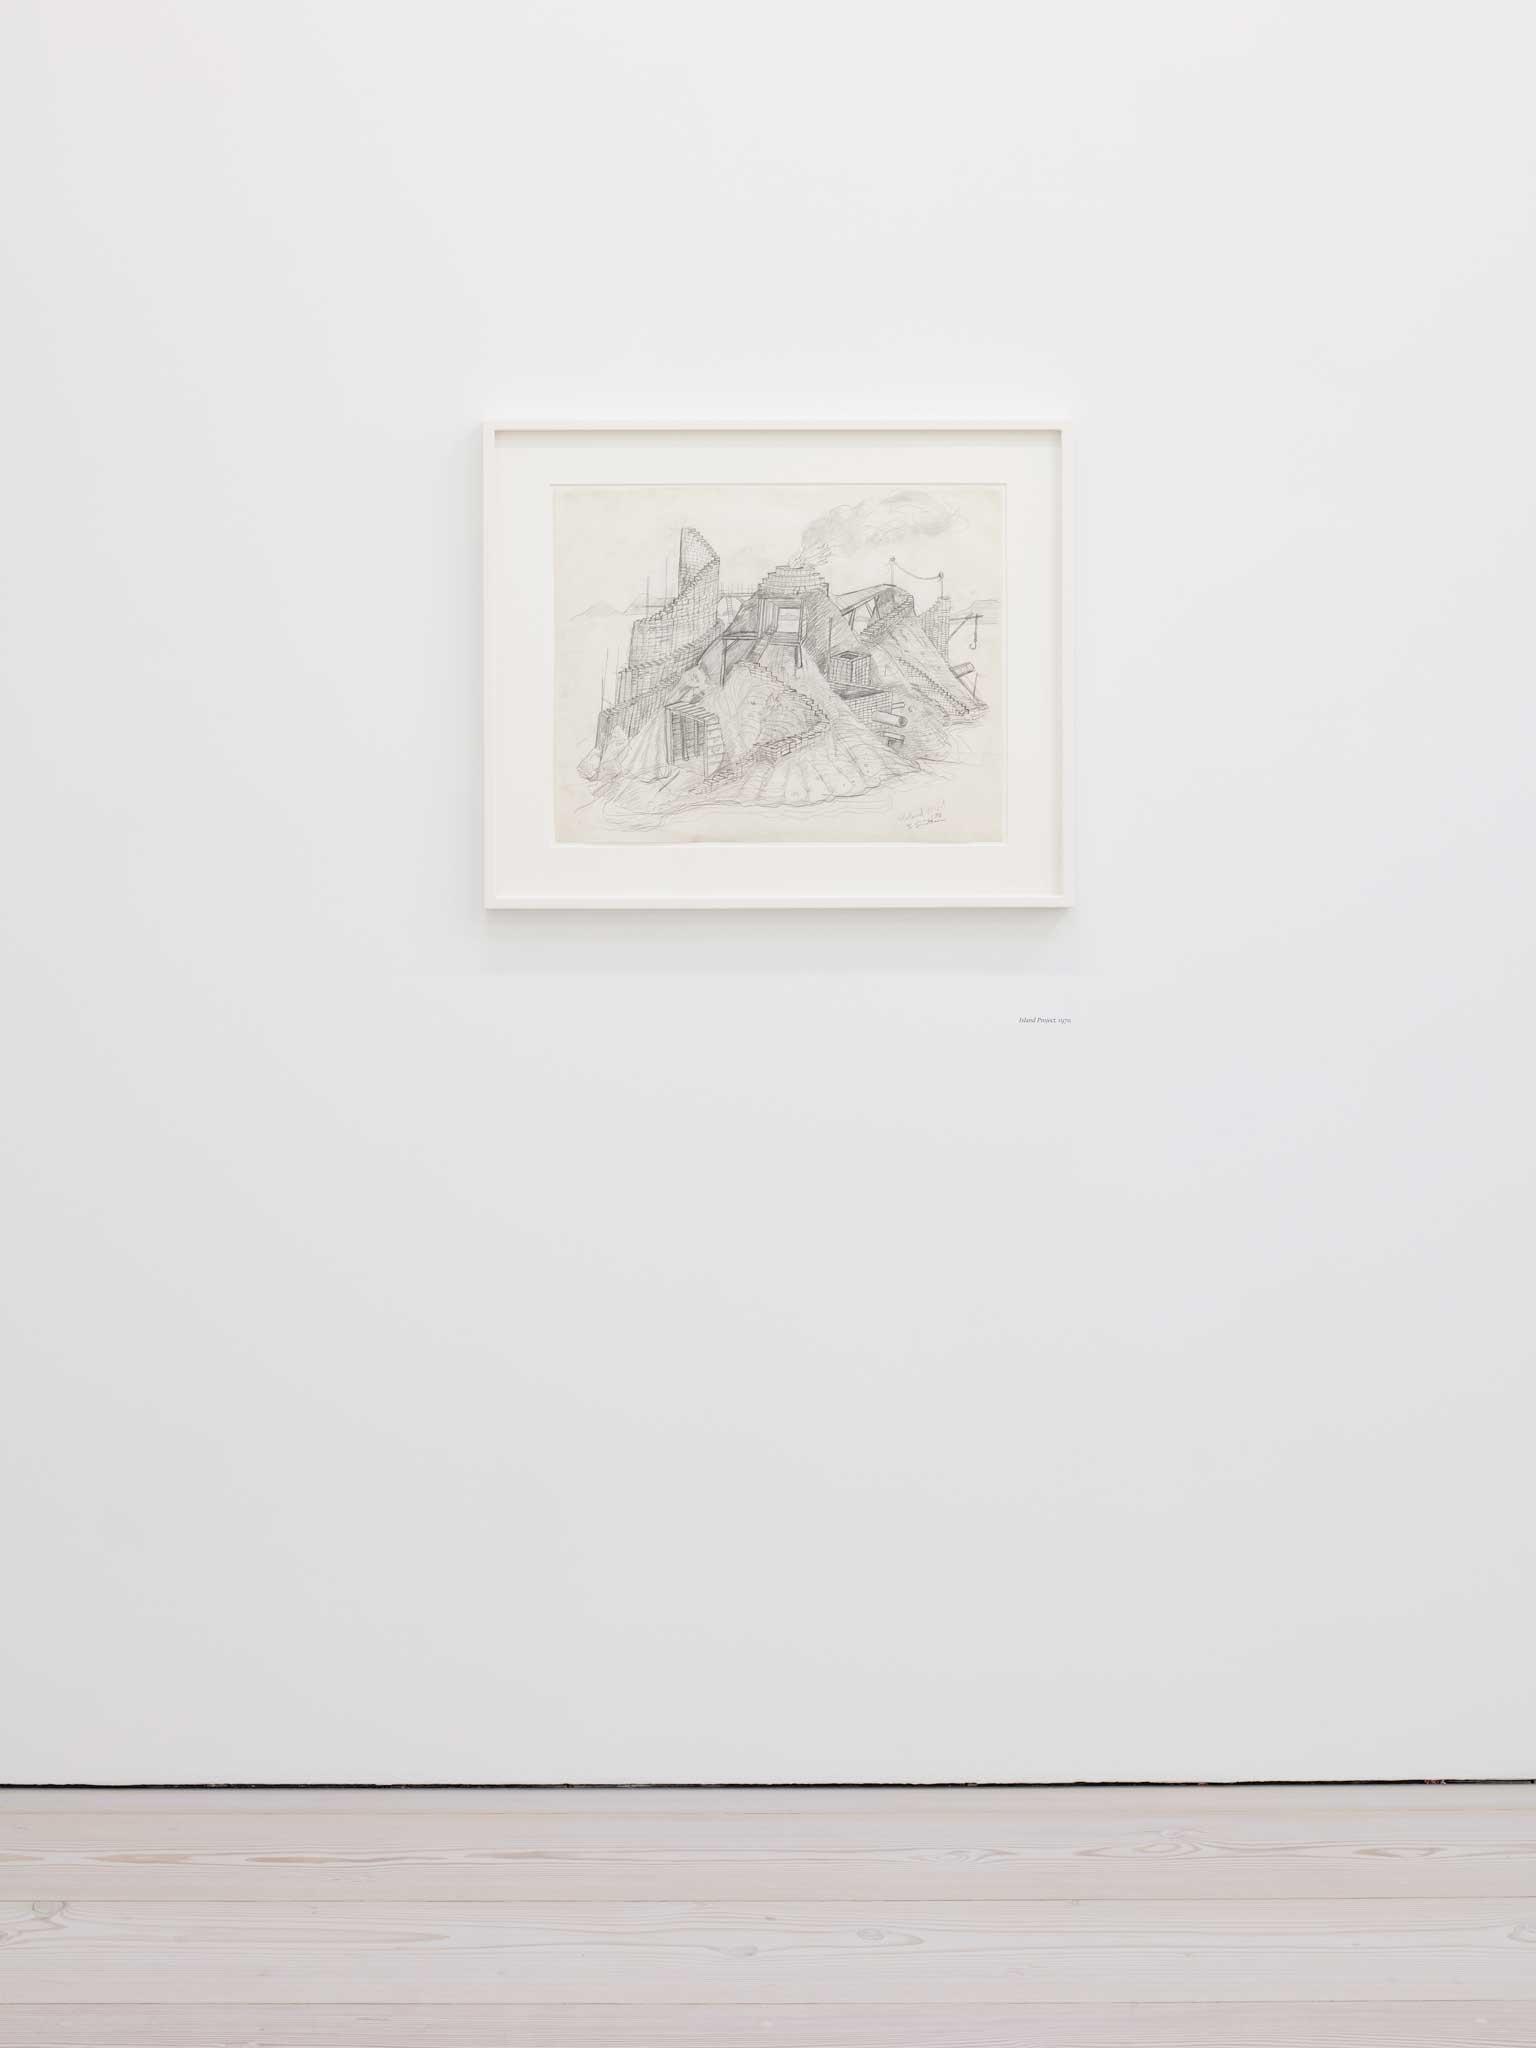 graphite drawing of an imagined island landscape in a white frame on a white wall